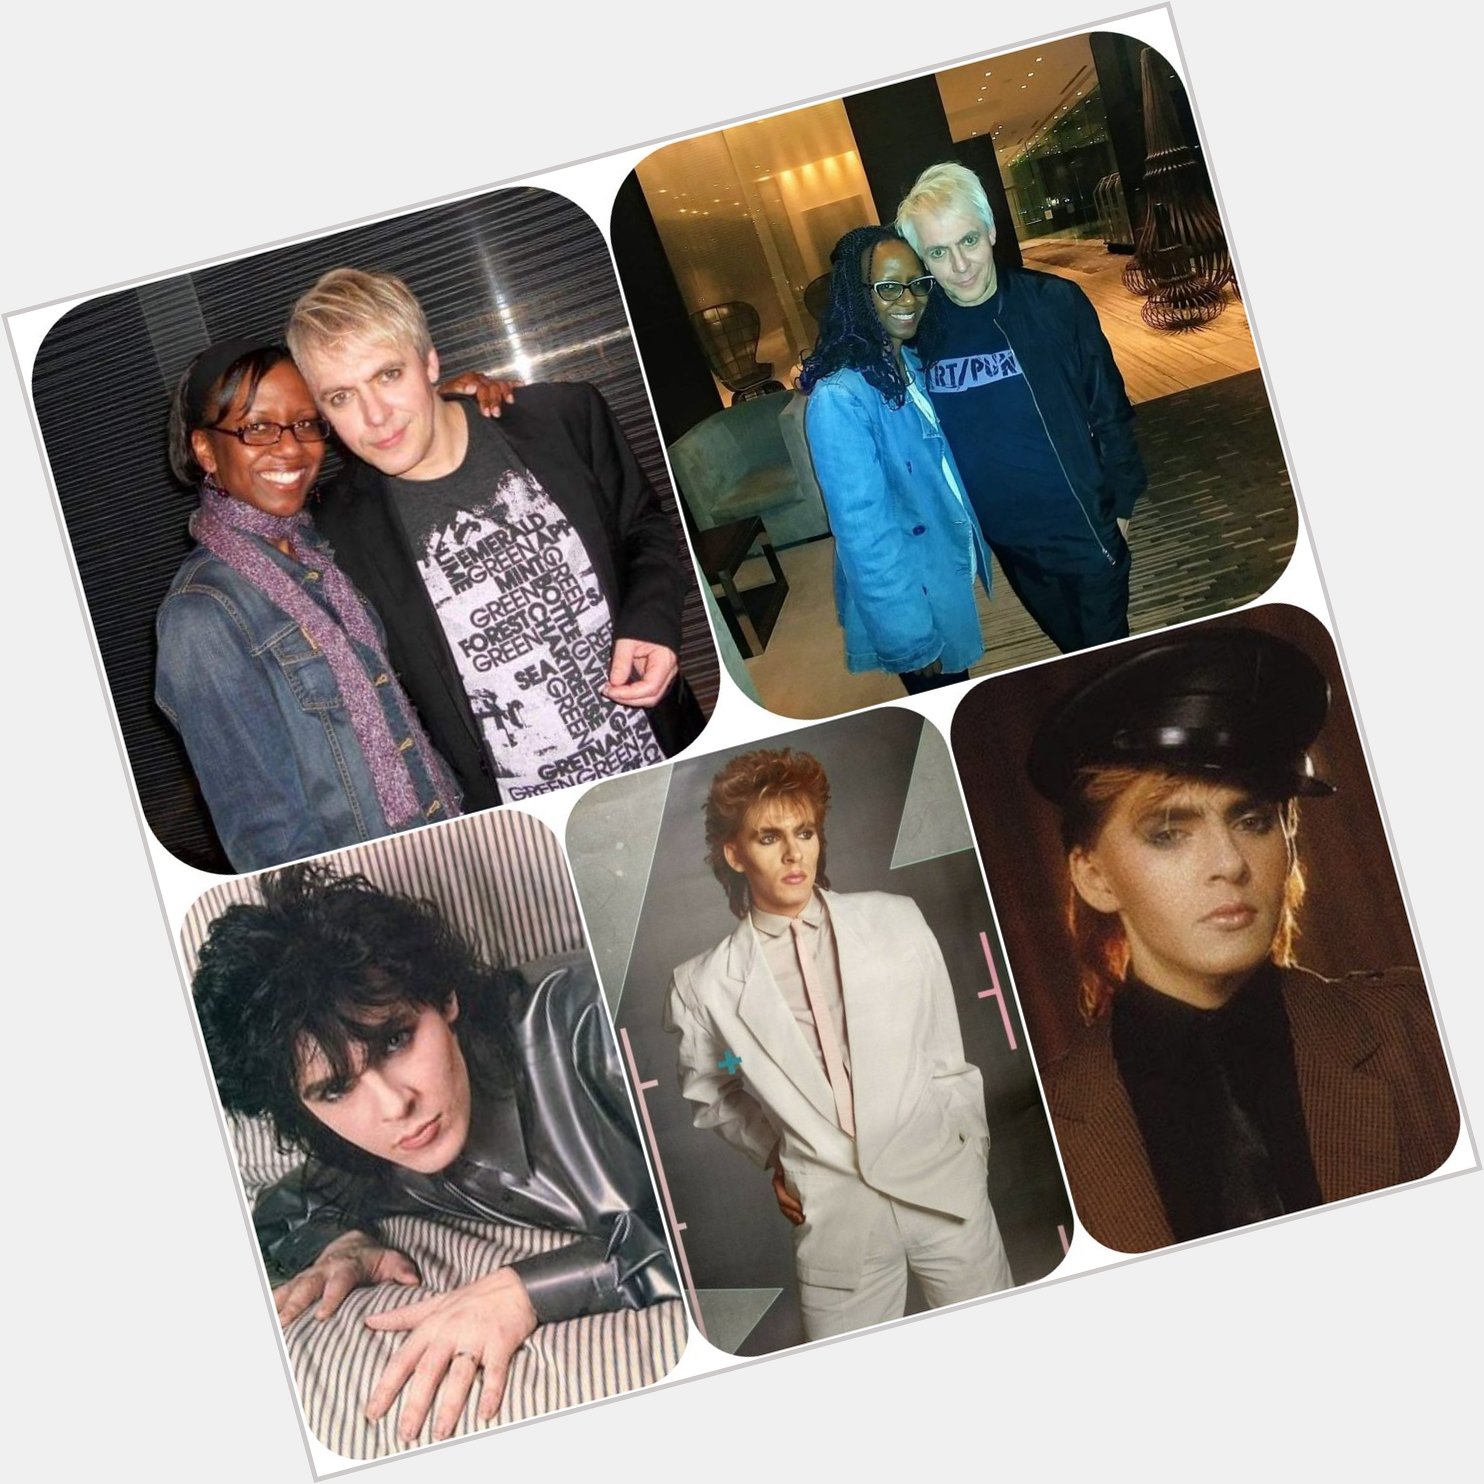 Happy Birthday to the talented wonder Nick Rhodes! Already celebrating with lots of music.  